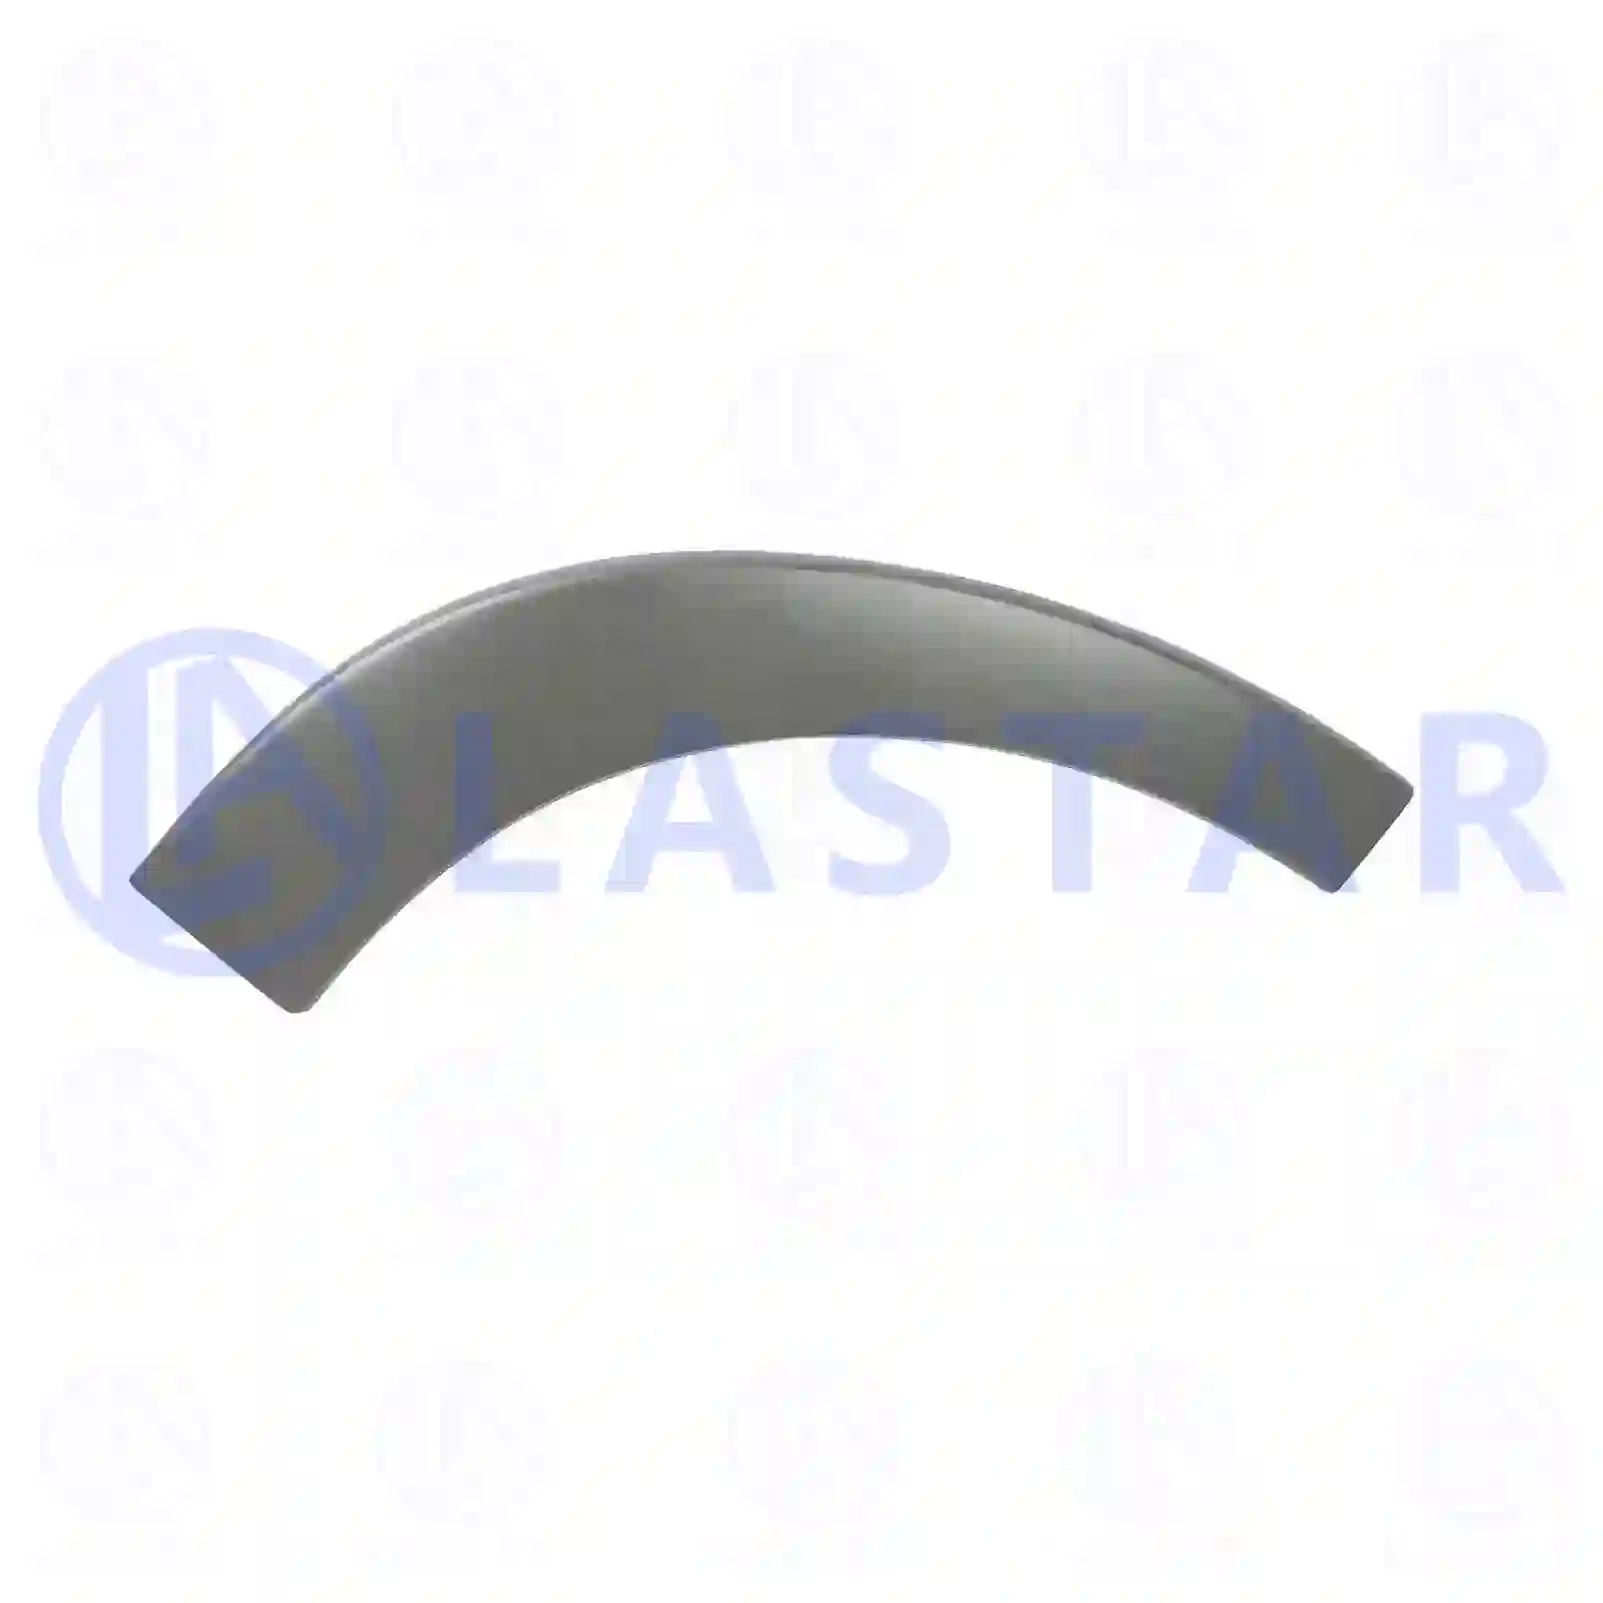 Cover, boarding step, right, 77719399, 9436660737, 94366607377354, 94366607377C72 ||  77719399 Lastar Spare Part | Truck Spare Parts, Auotomotive Spare Parts Cover, boarding step, right, 77719399, 9436660737, 94366607377354, 94366607377C72 ||  77719399 Lastar Spare Part | Truck Spare Parts, Auotomotive Spare Parts